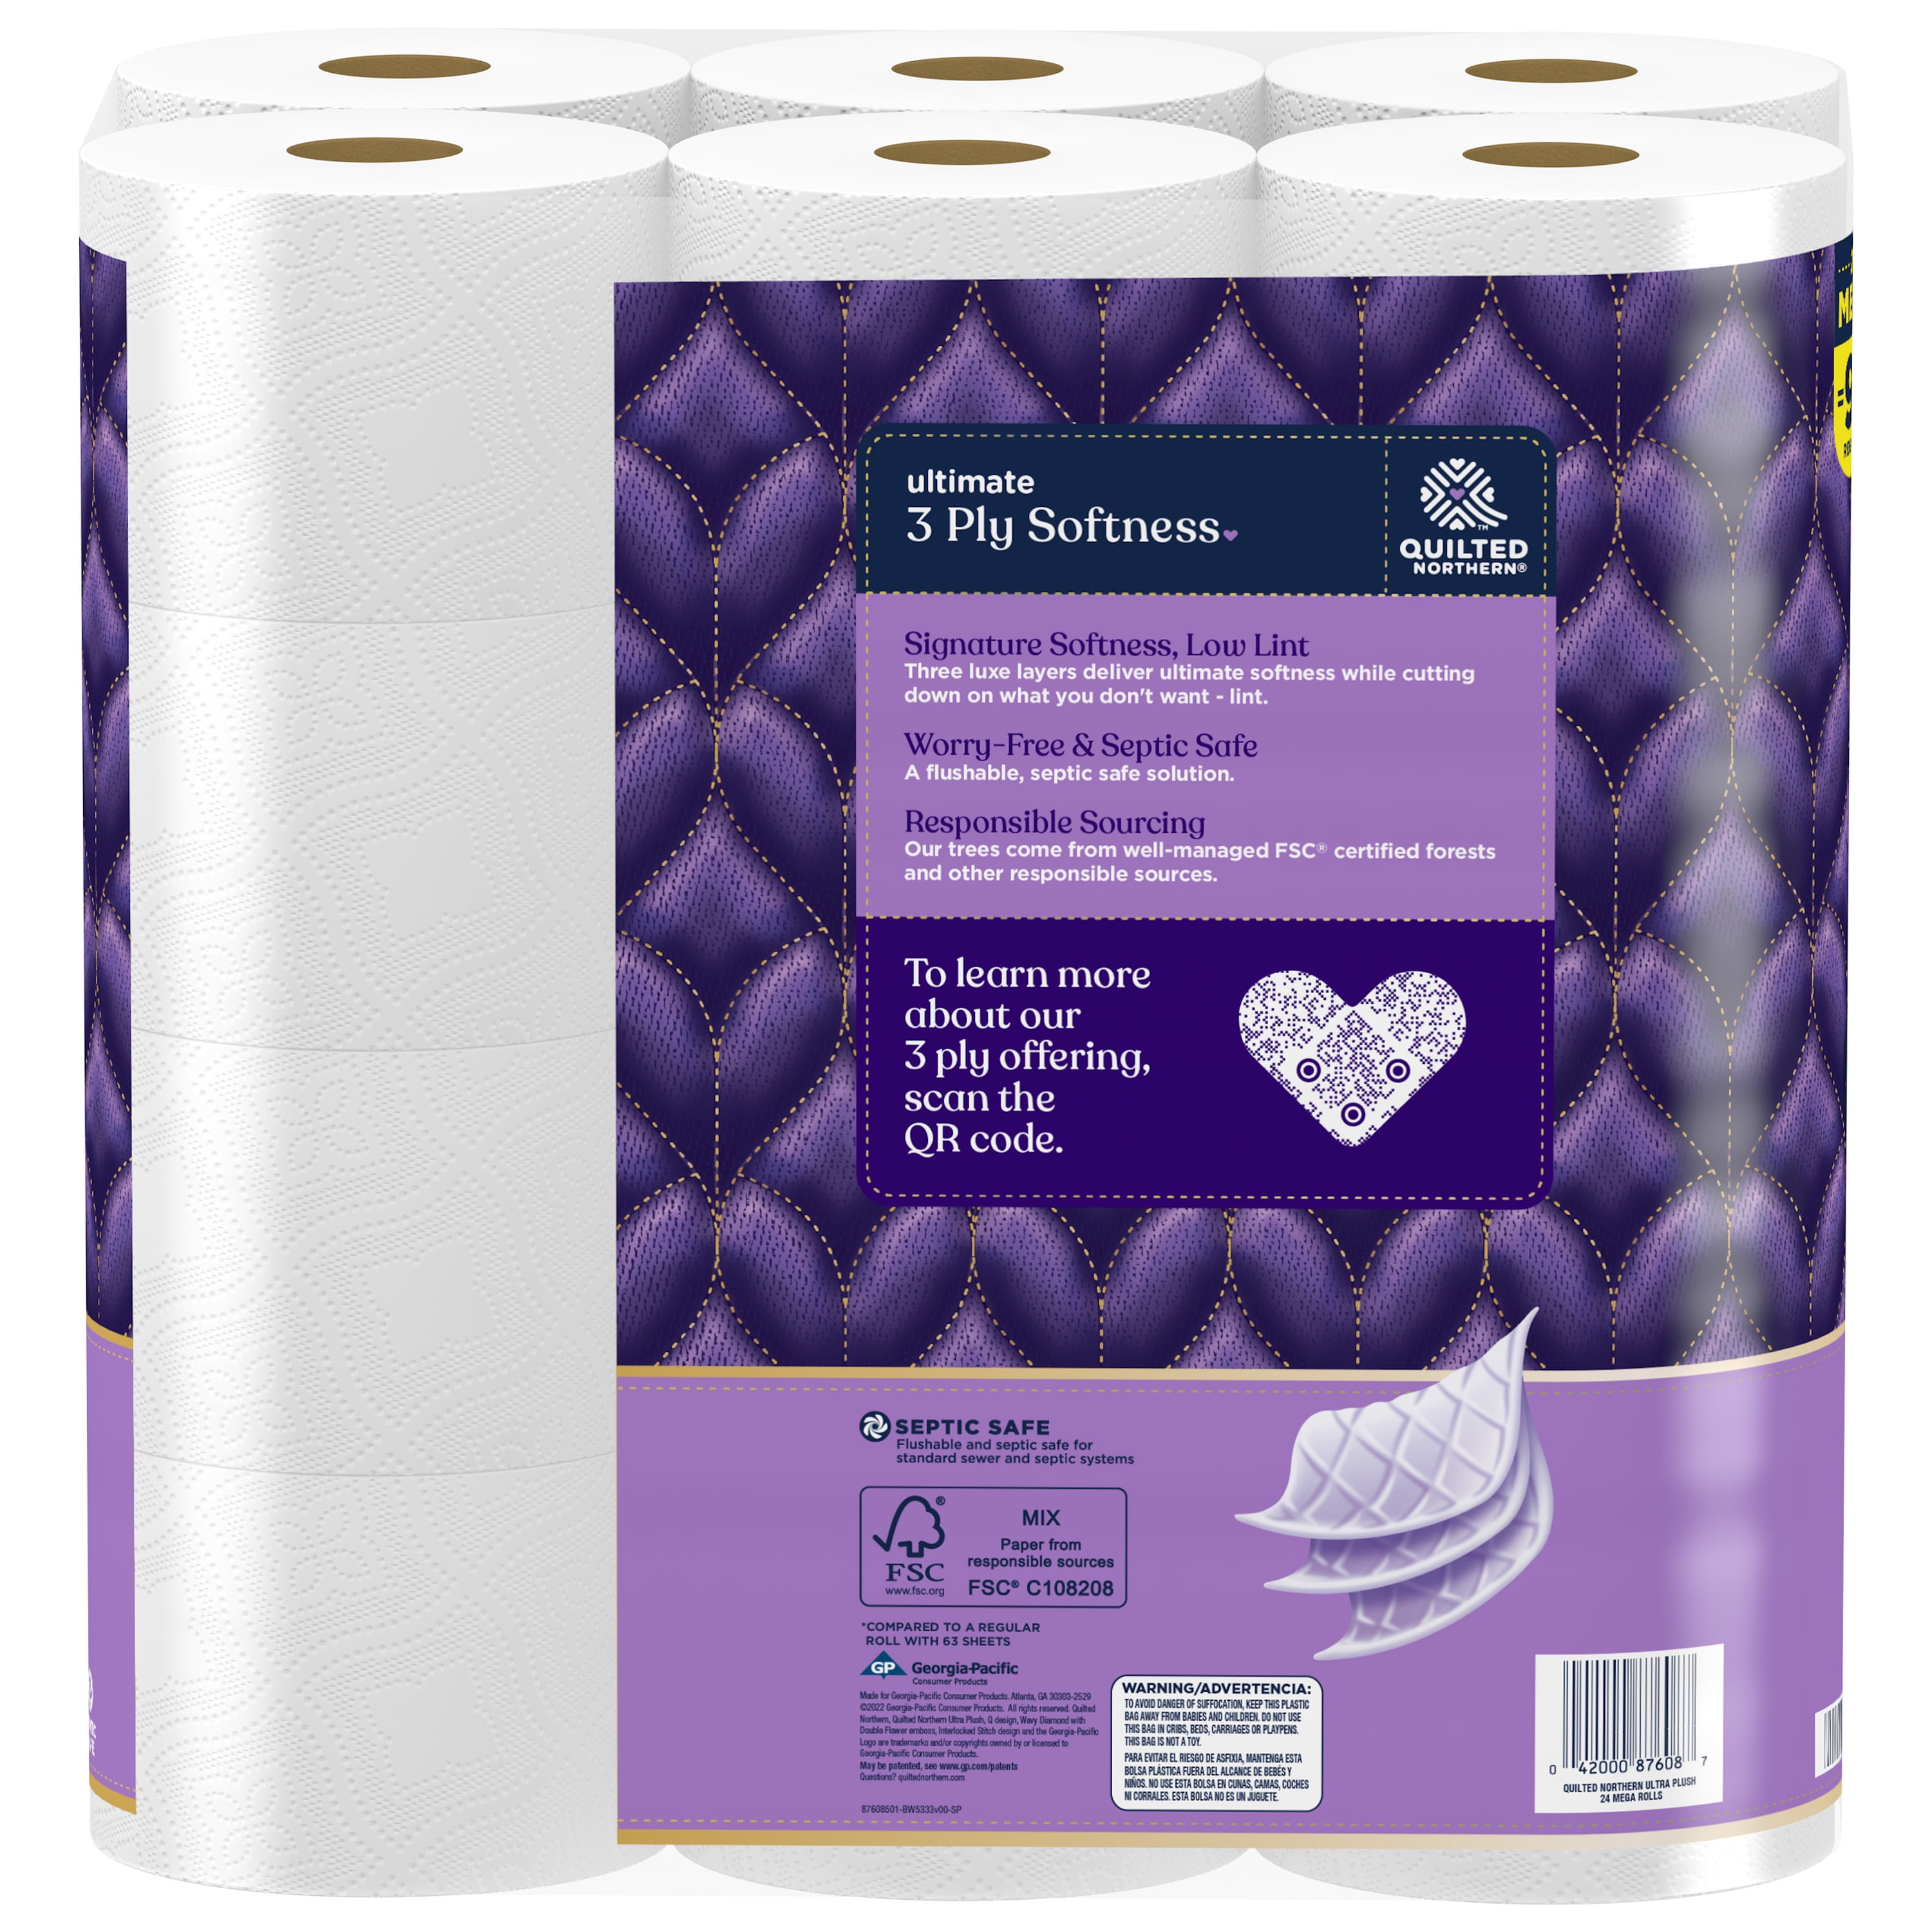 Quilted Northern Ultra Plush Toilet Paper, 24 Supreme Rolls = 105 Regular Rolls, 3-Ply Bath Tissue